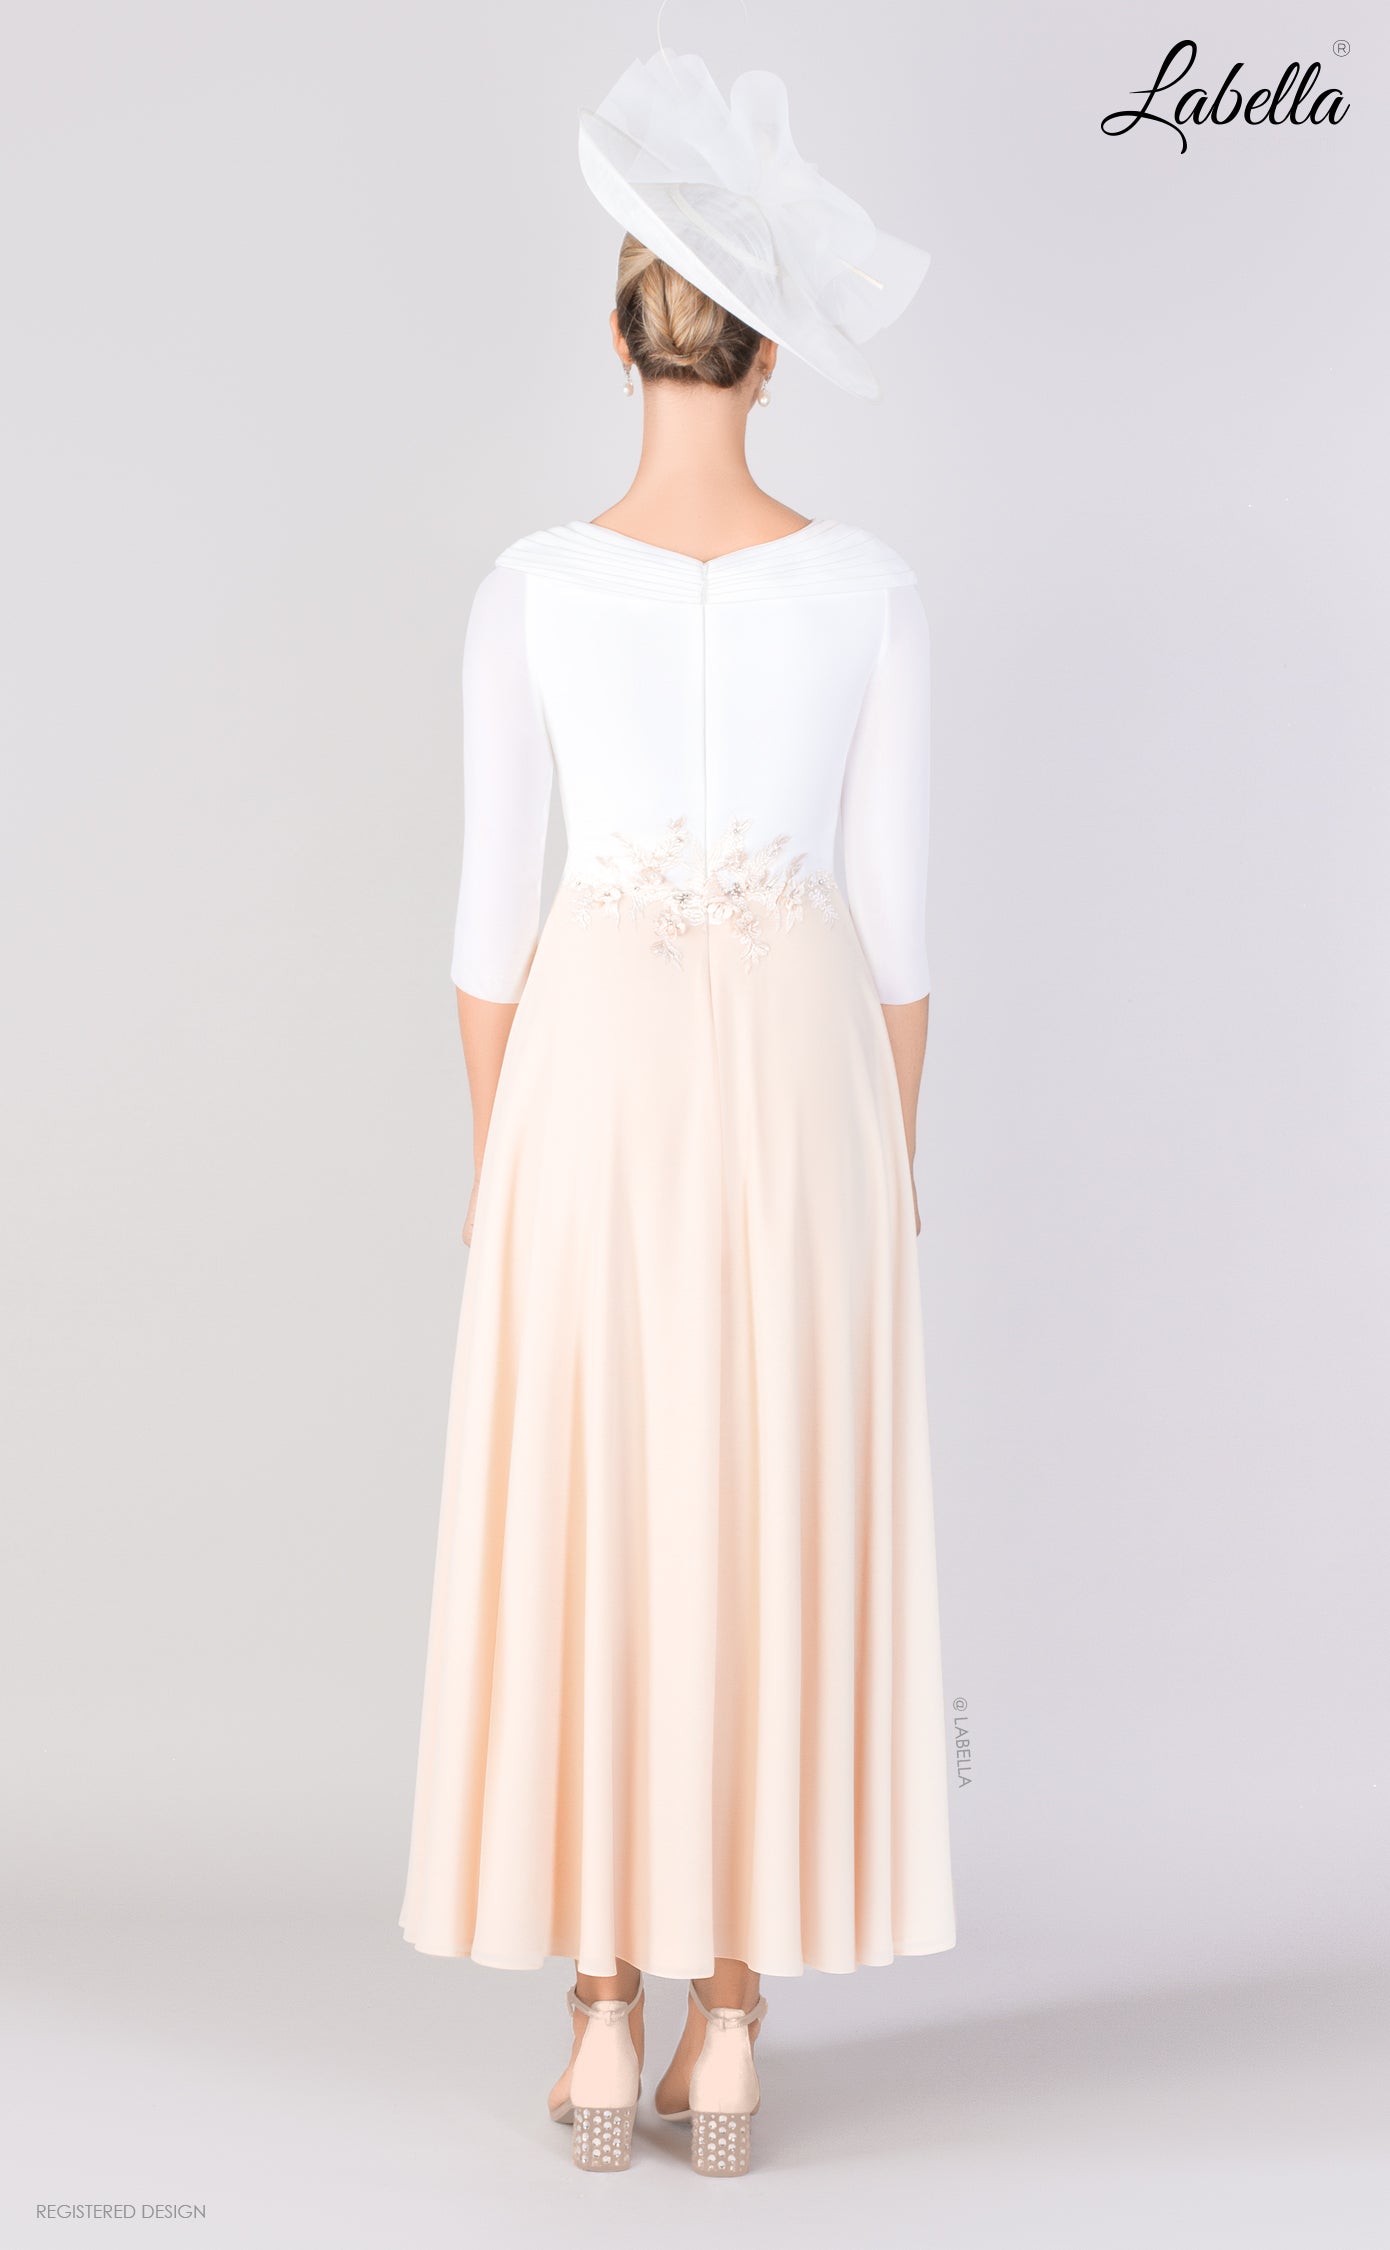 Ivory/Champagne Dress With Beading & Floral Detailing